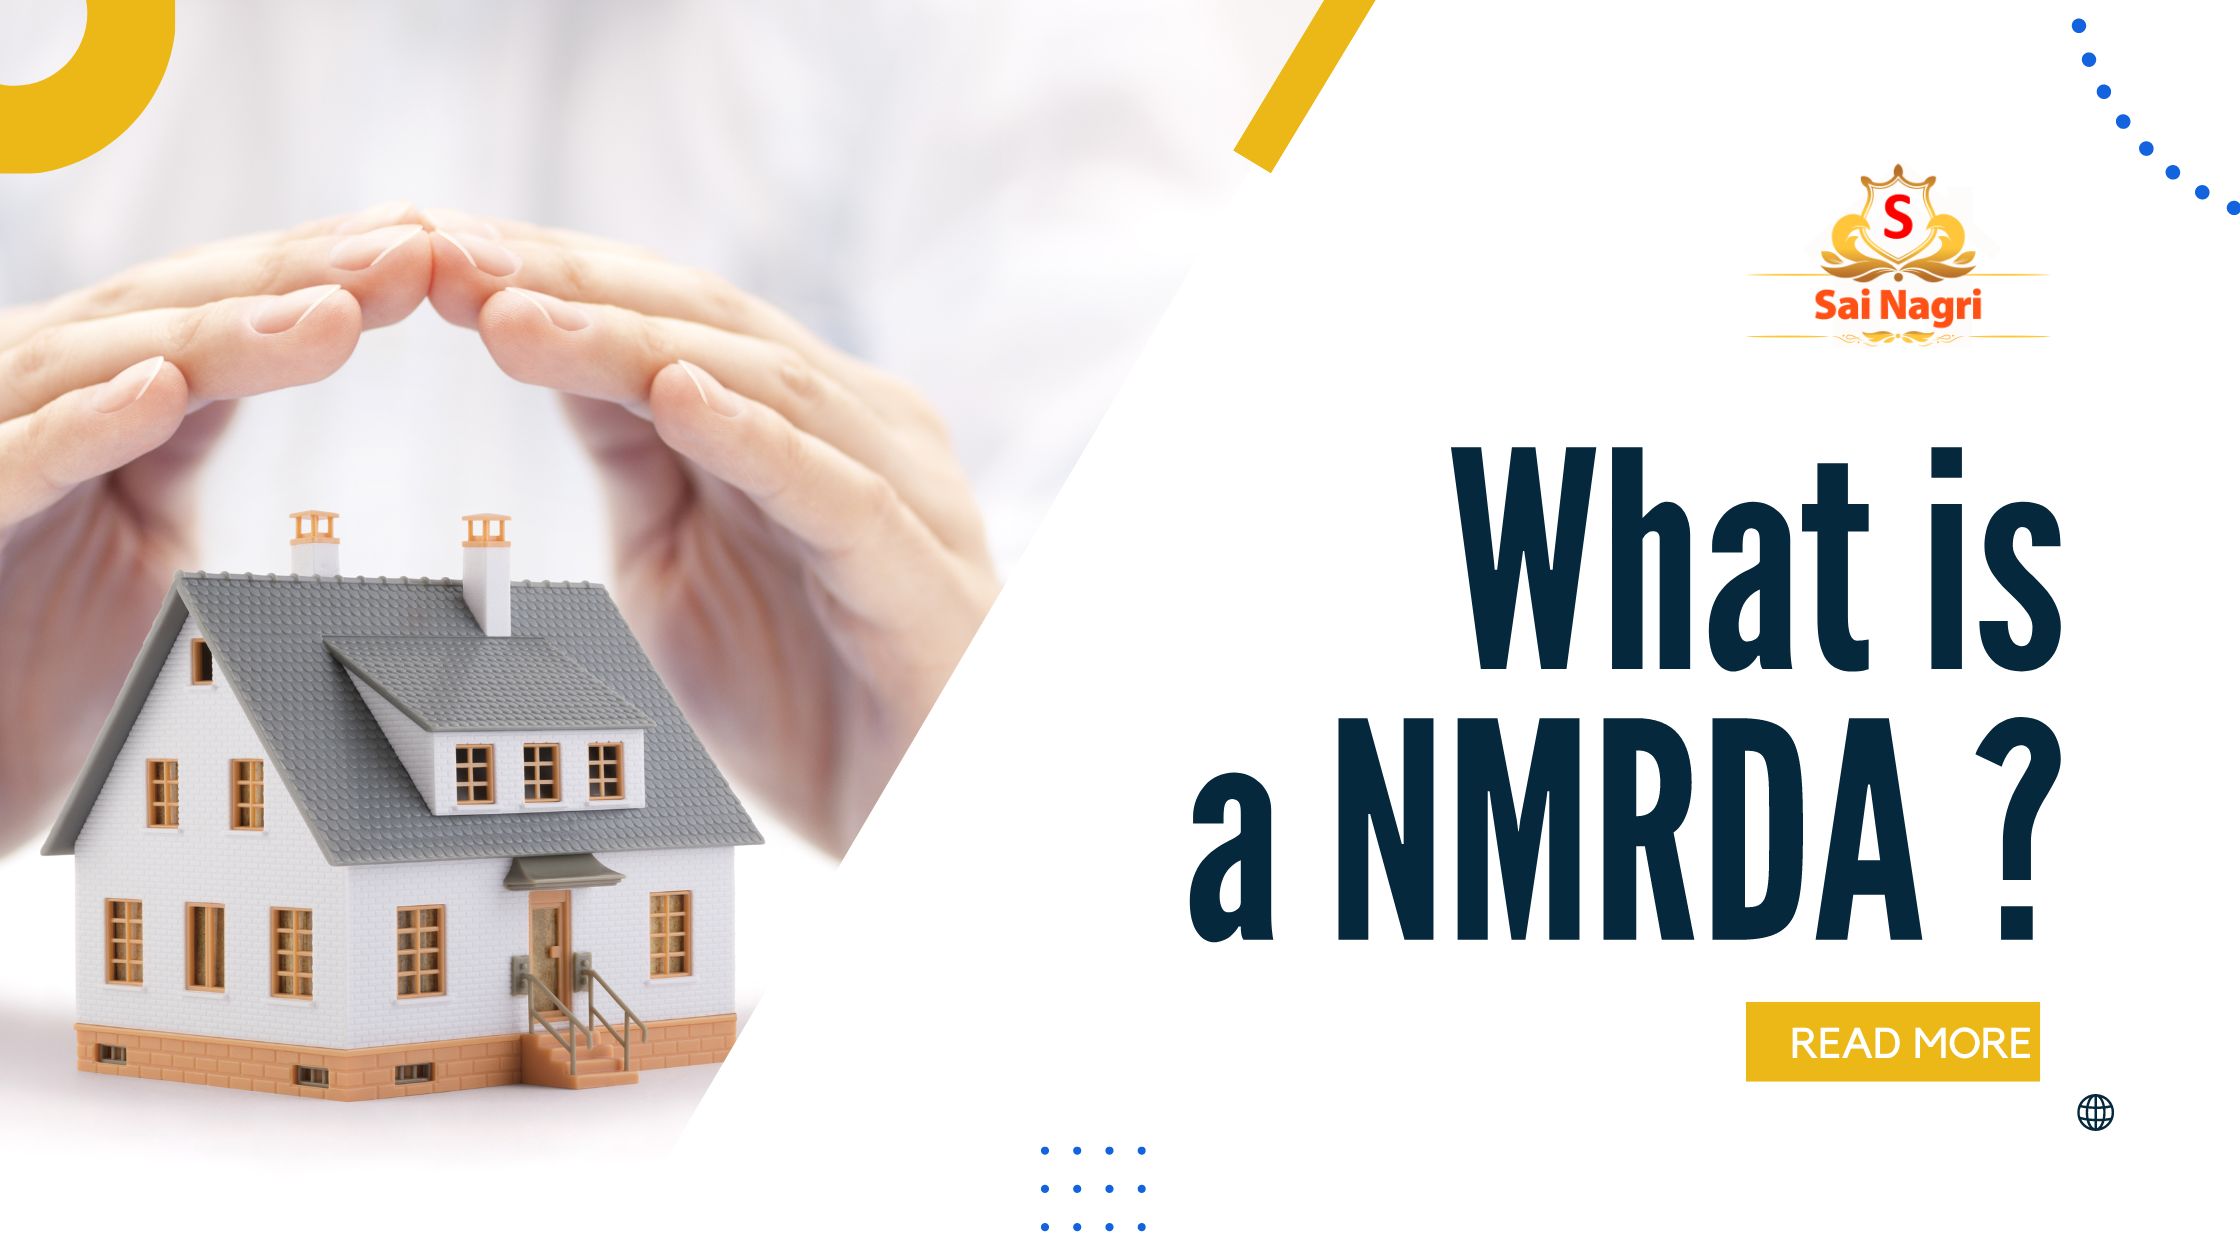  What is a NMRDA ?